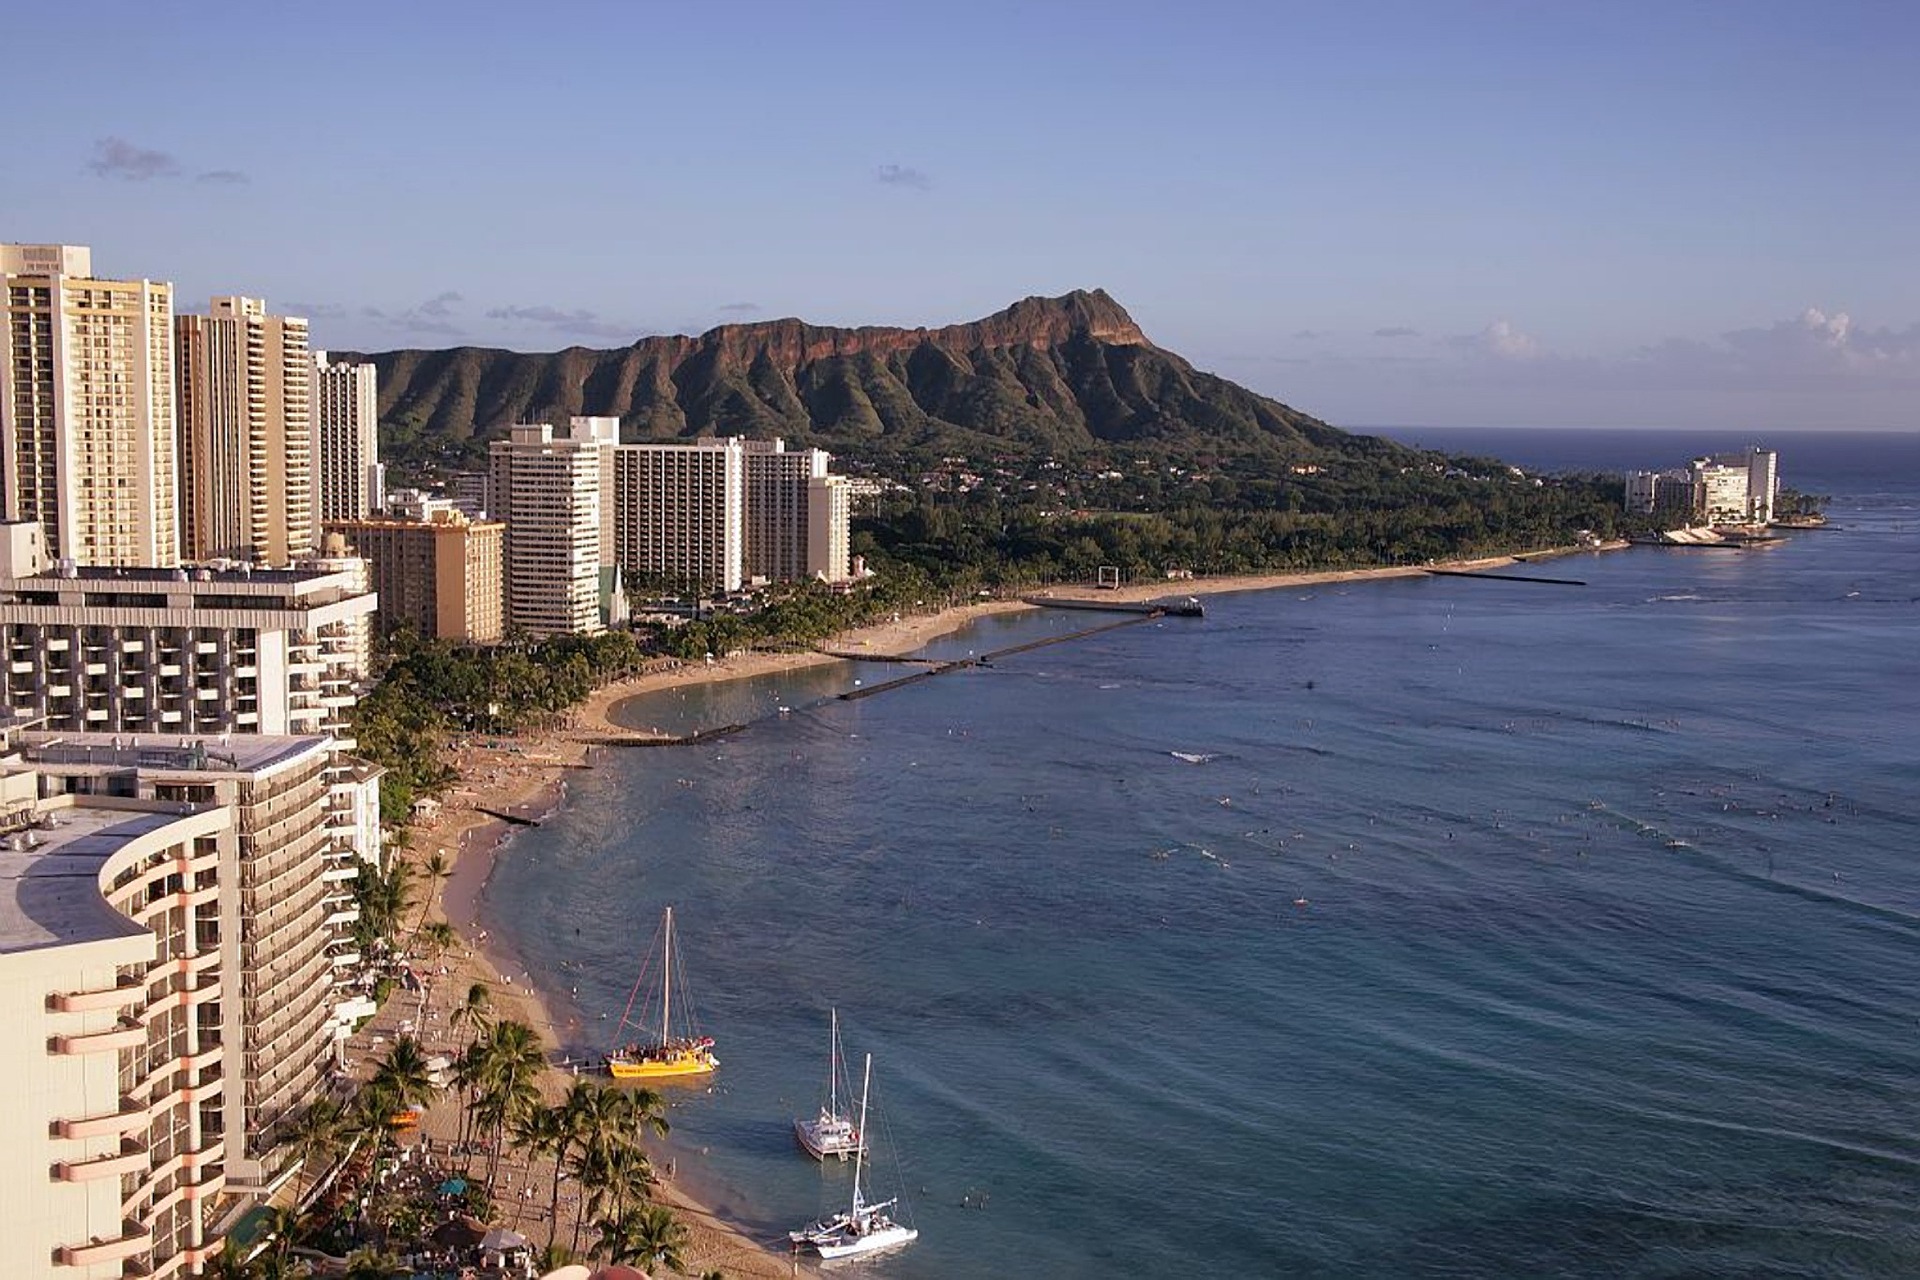 honolulu coastline with residential towers and hotels and boats